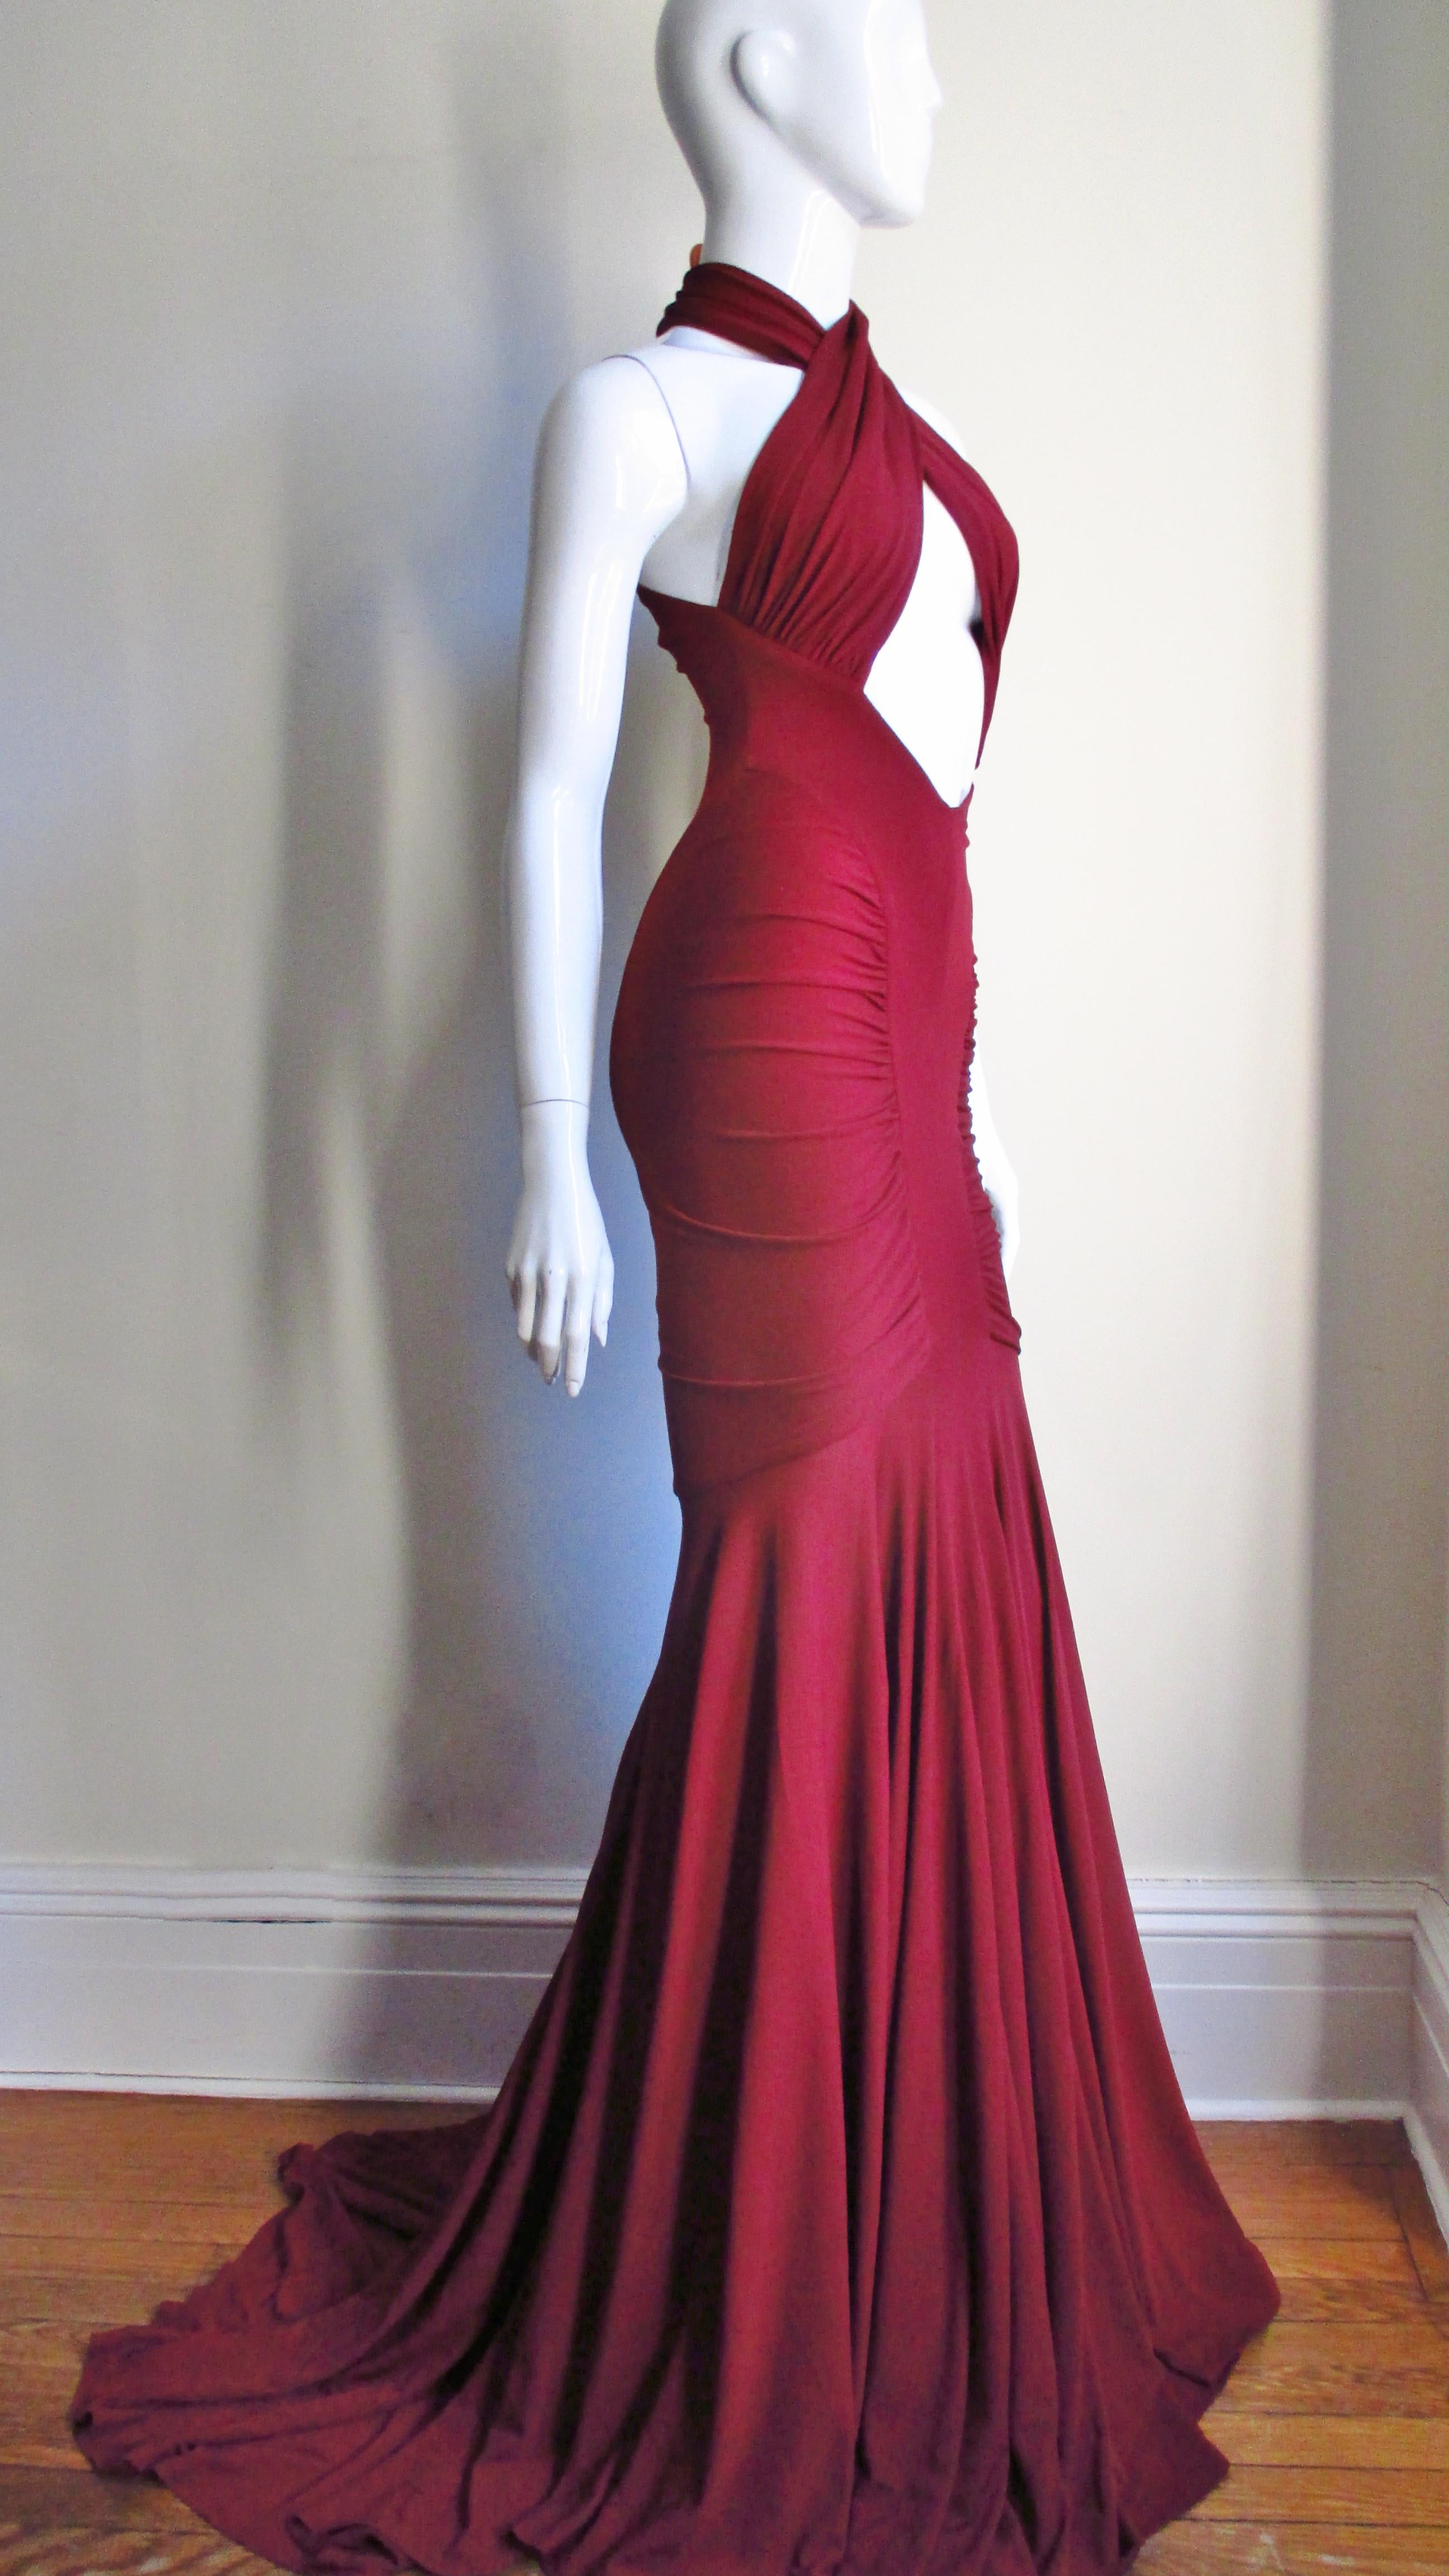 Guy Laroche Bodycon Cut out Gown S/S 2005 For Sale 1